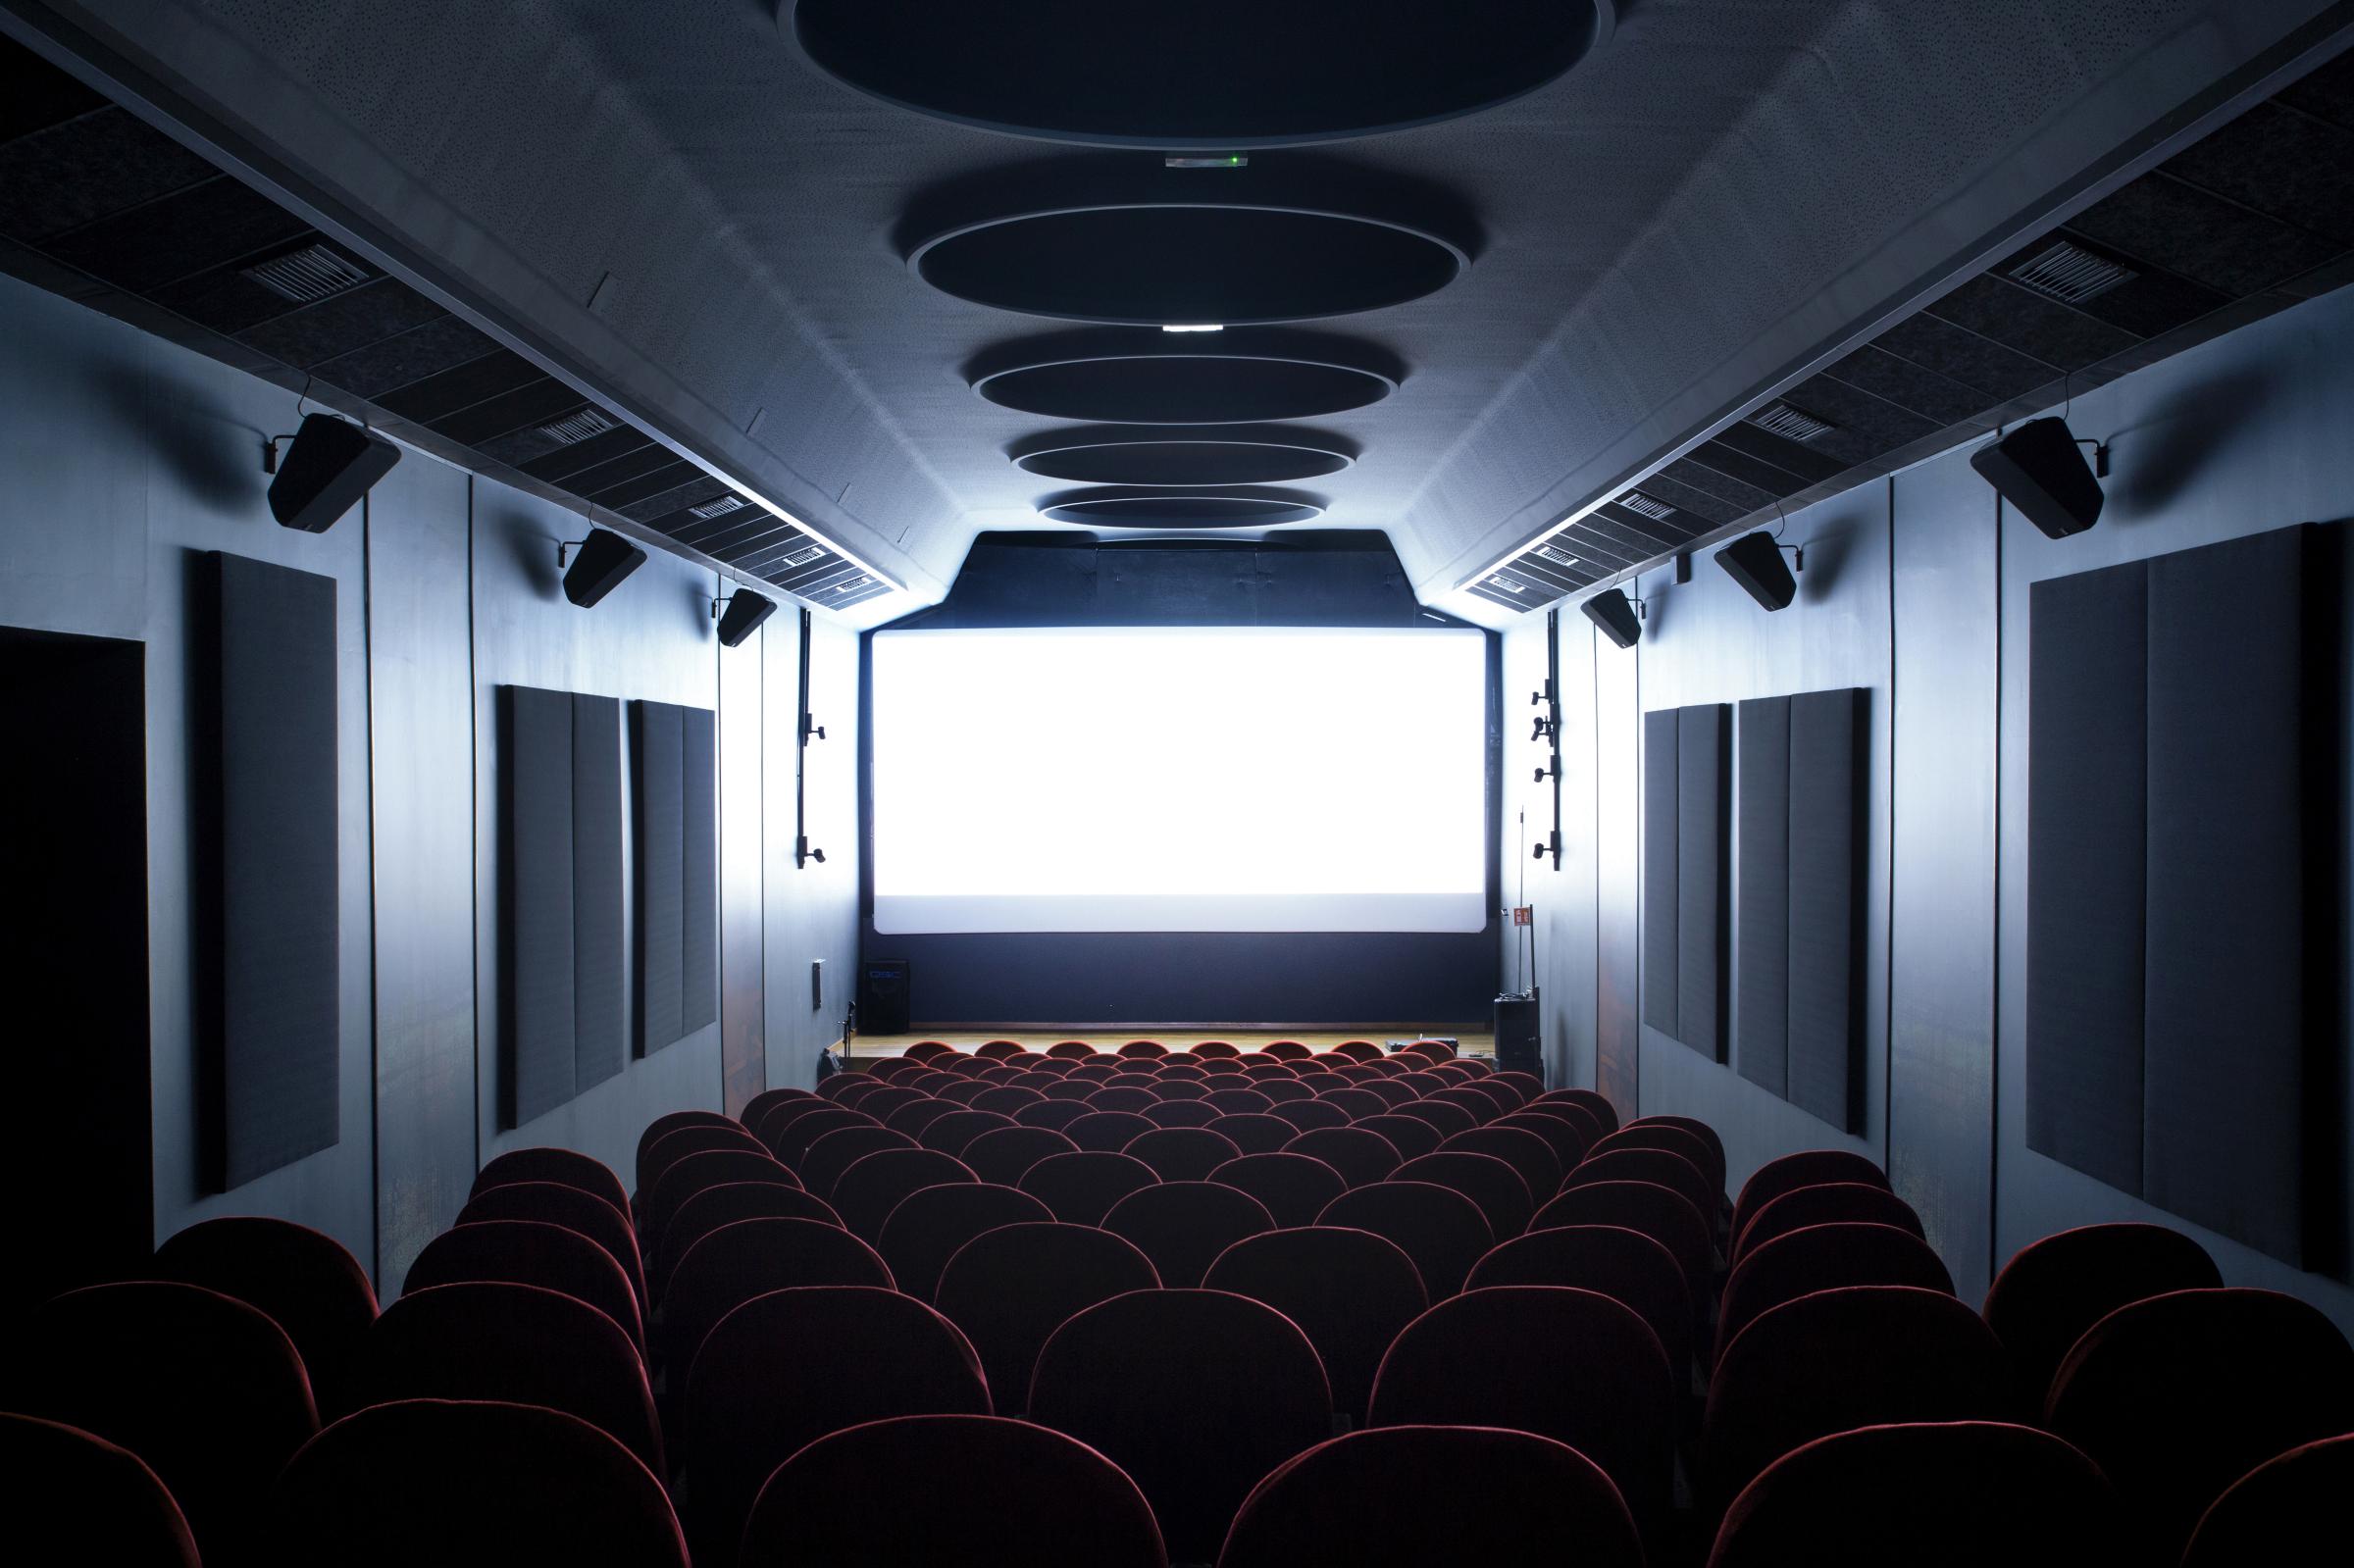 The show must go on - A screening room at the Cinema Centrale, Turin (Italy)